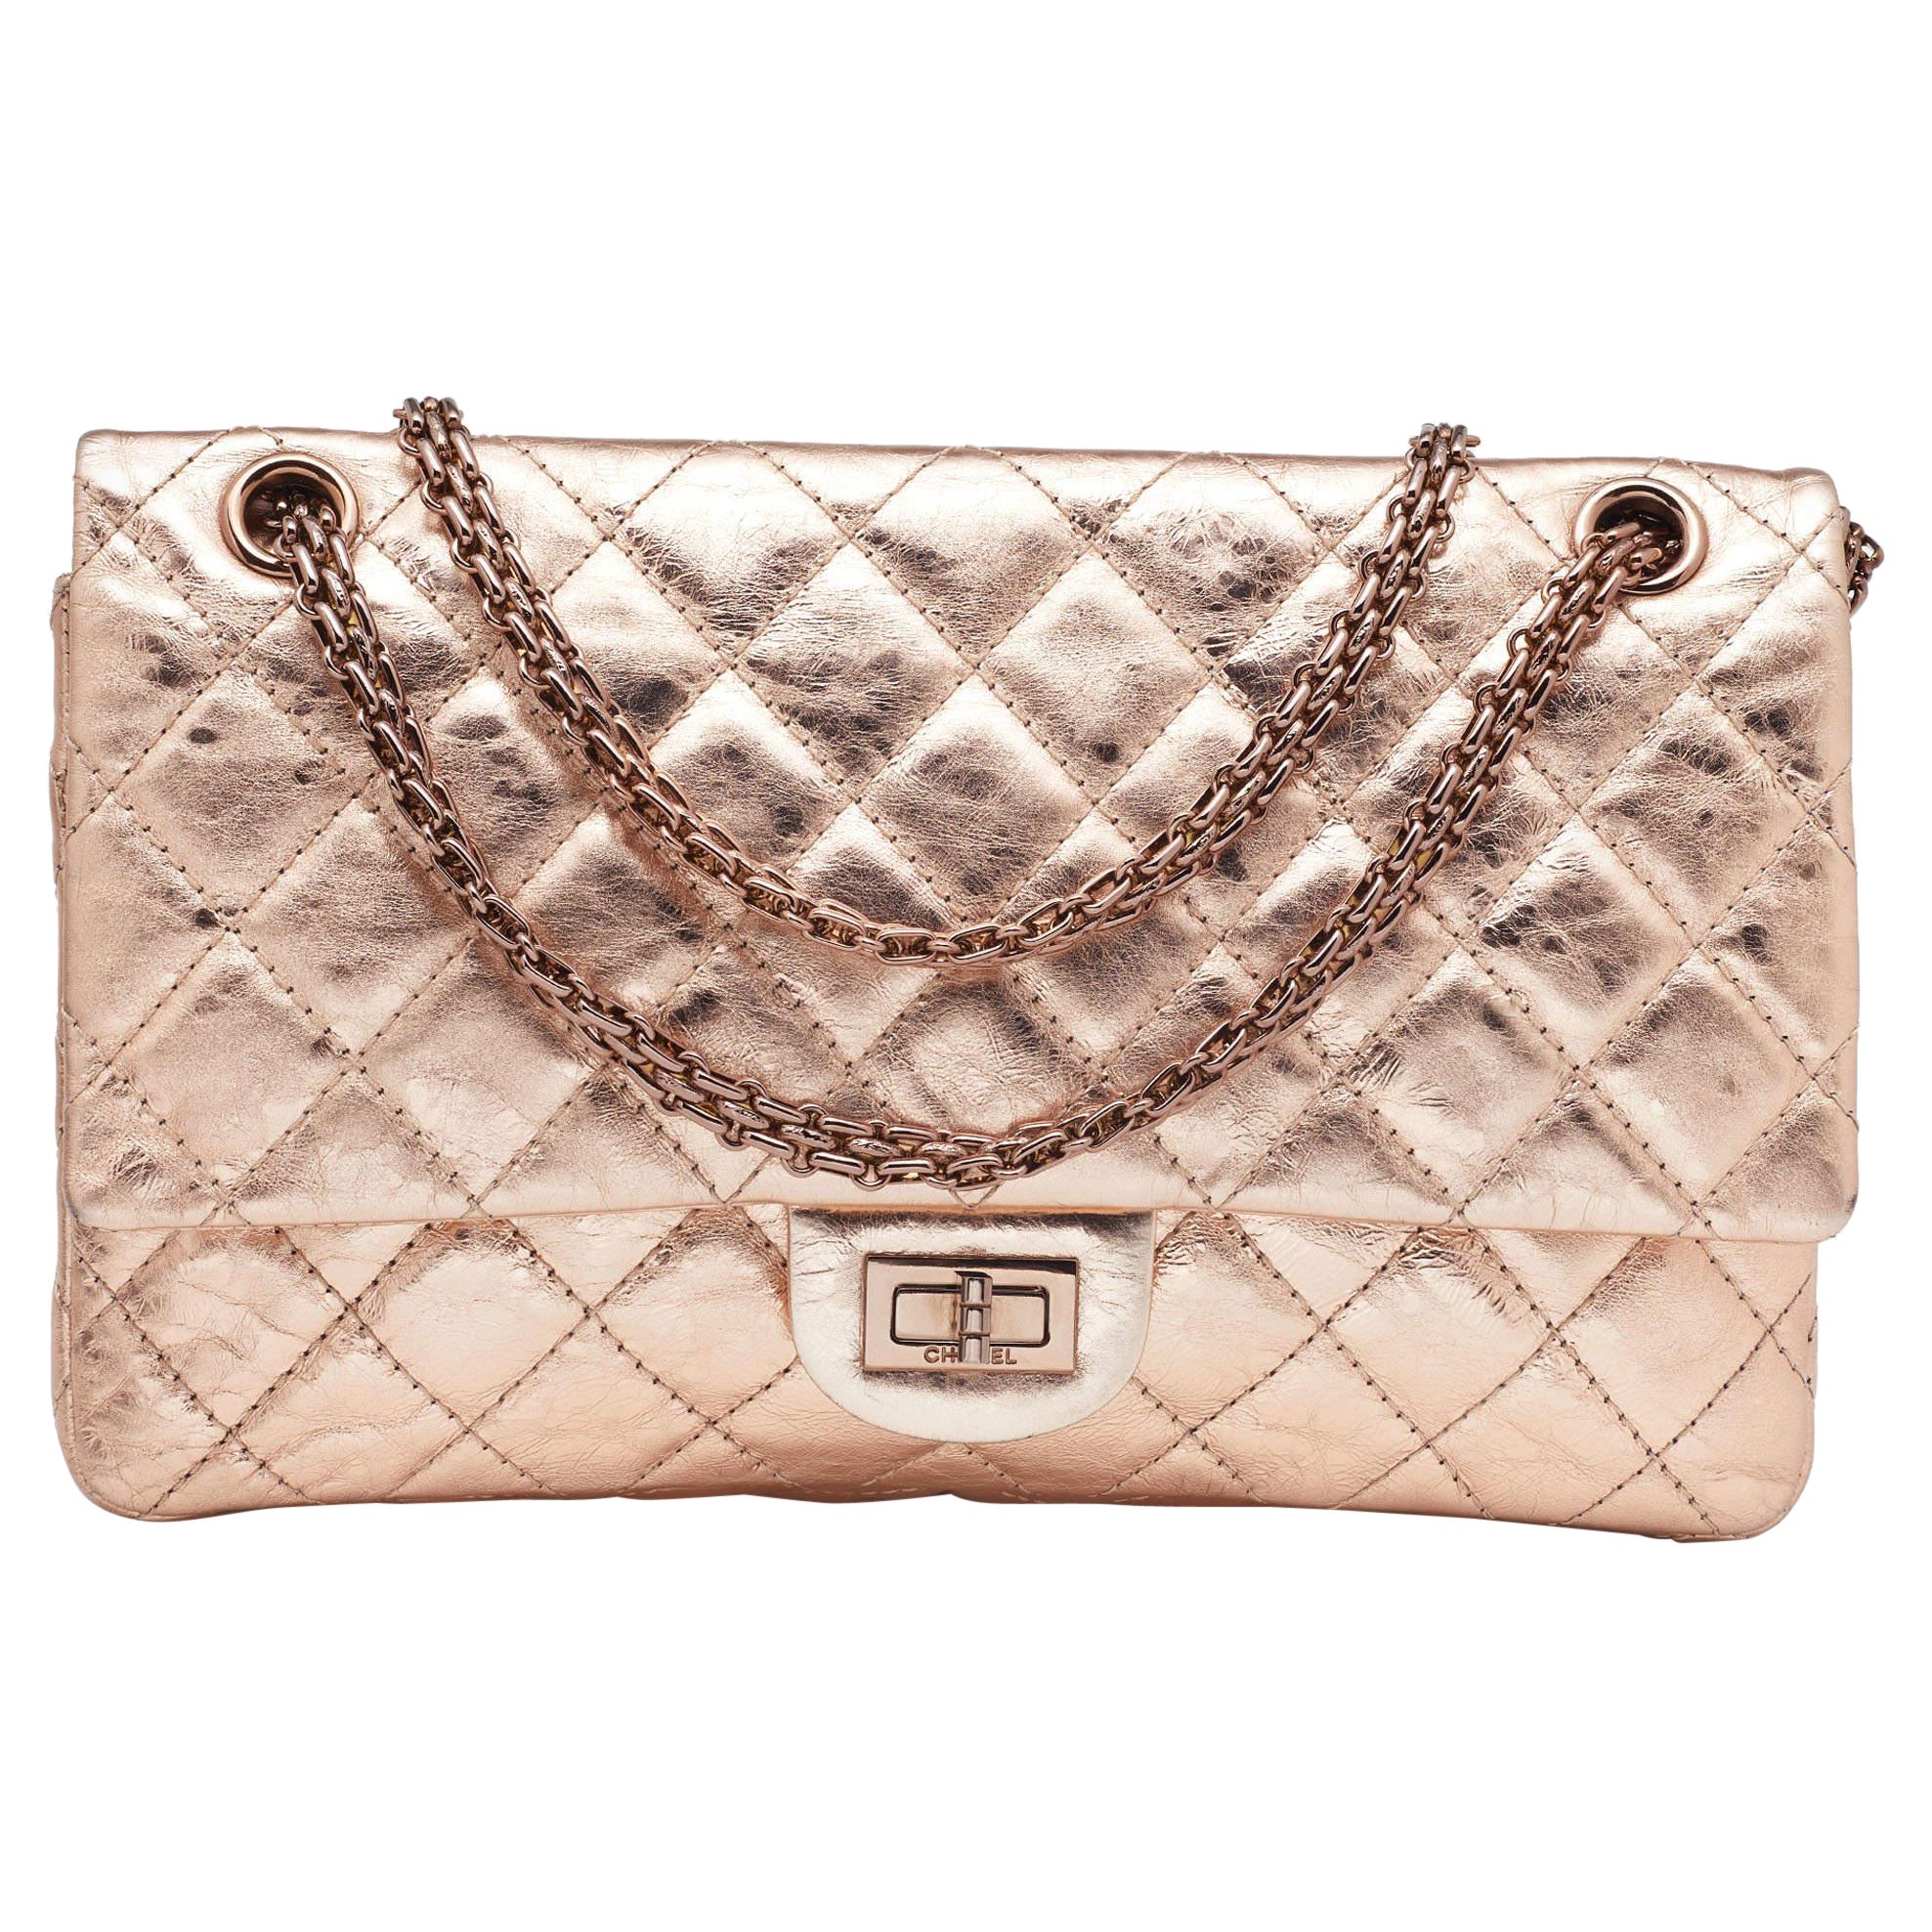 Chanel Hot Pink 2.55 Quilted Classic Chevre Leather Reissue 224